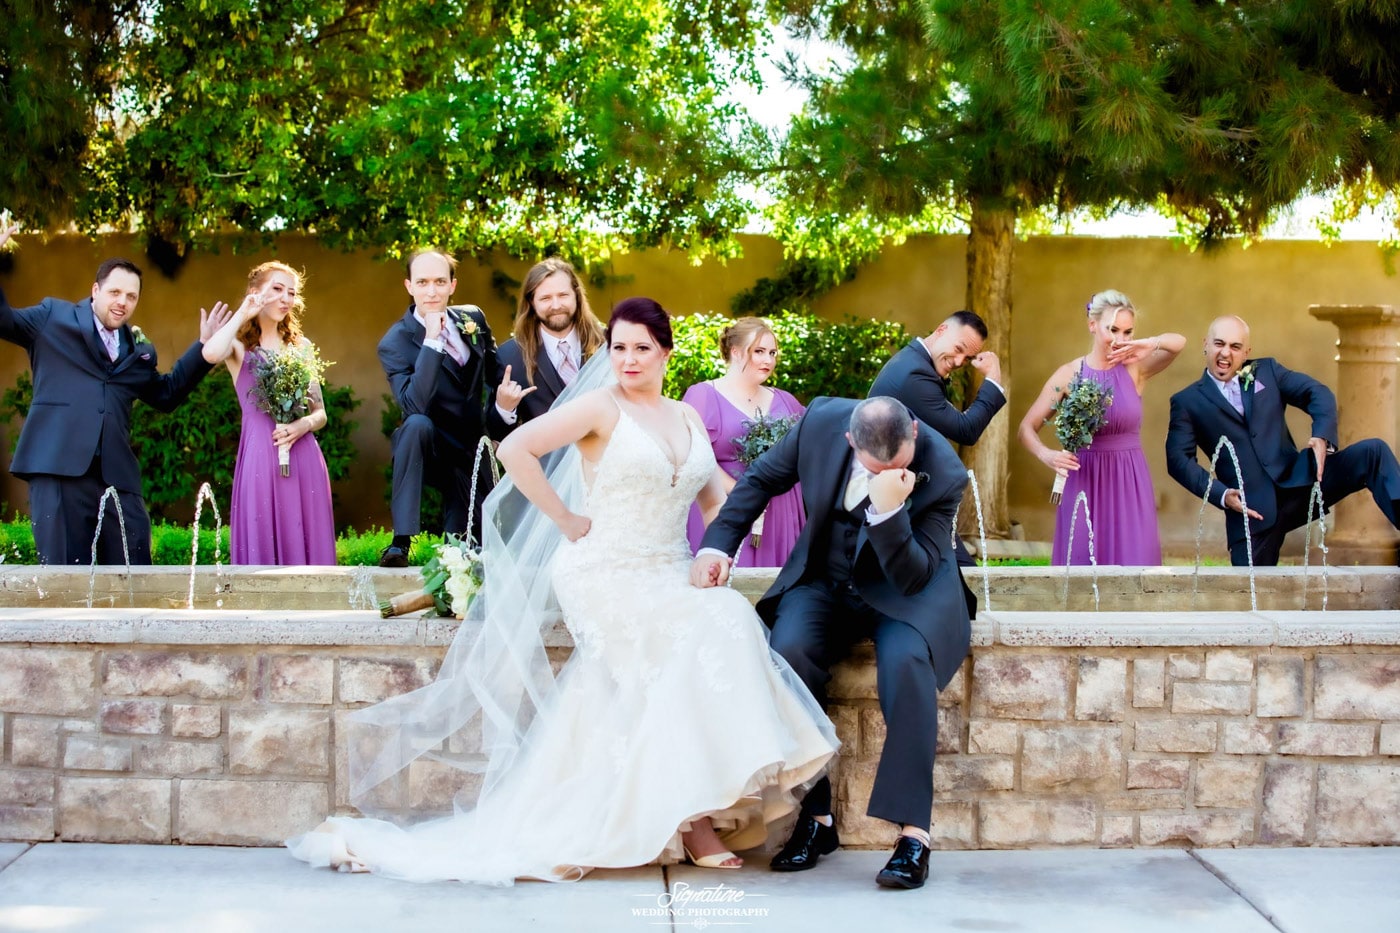 Bride and groom with wedding party funny pose with fountain